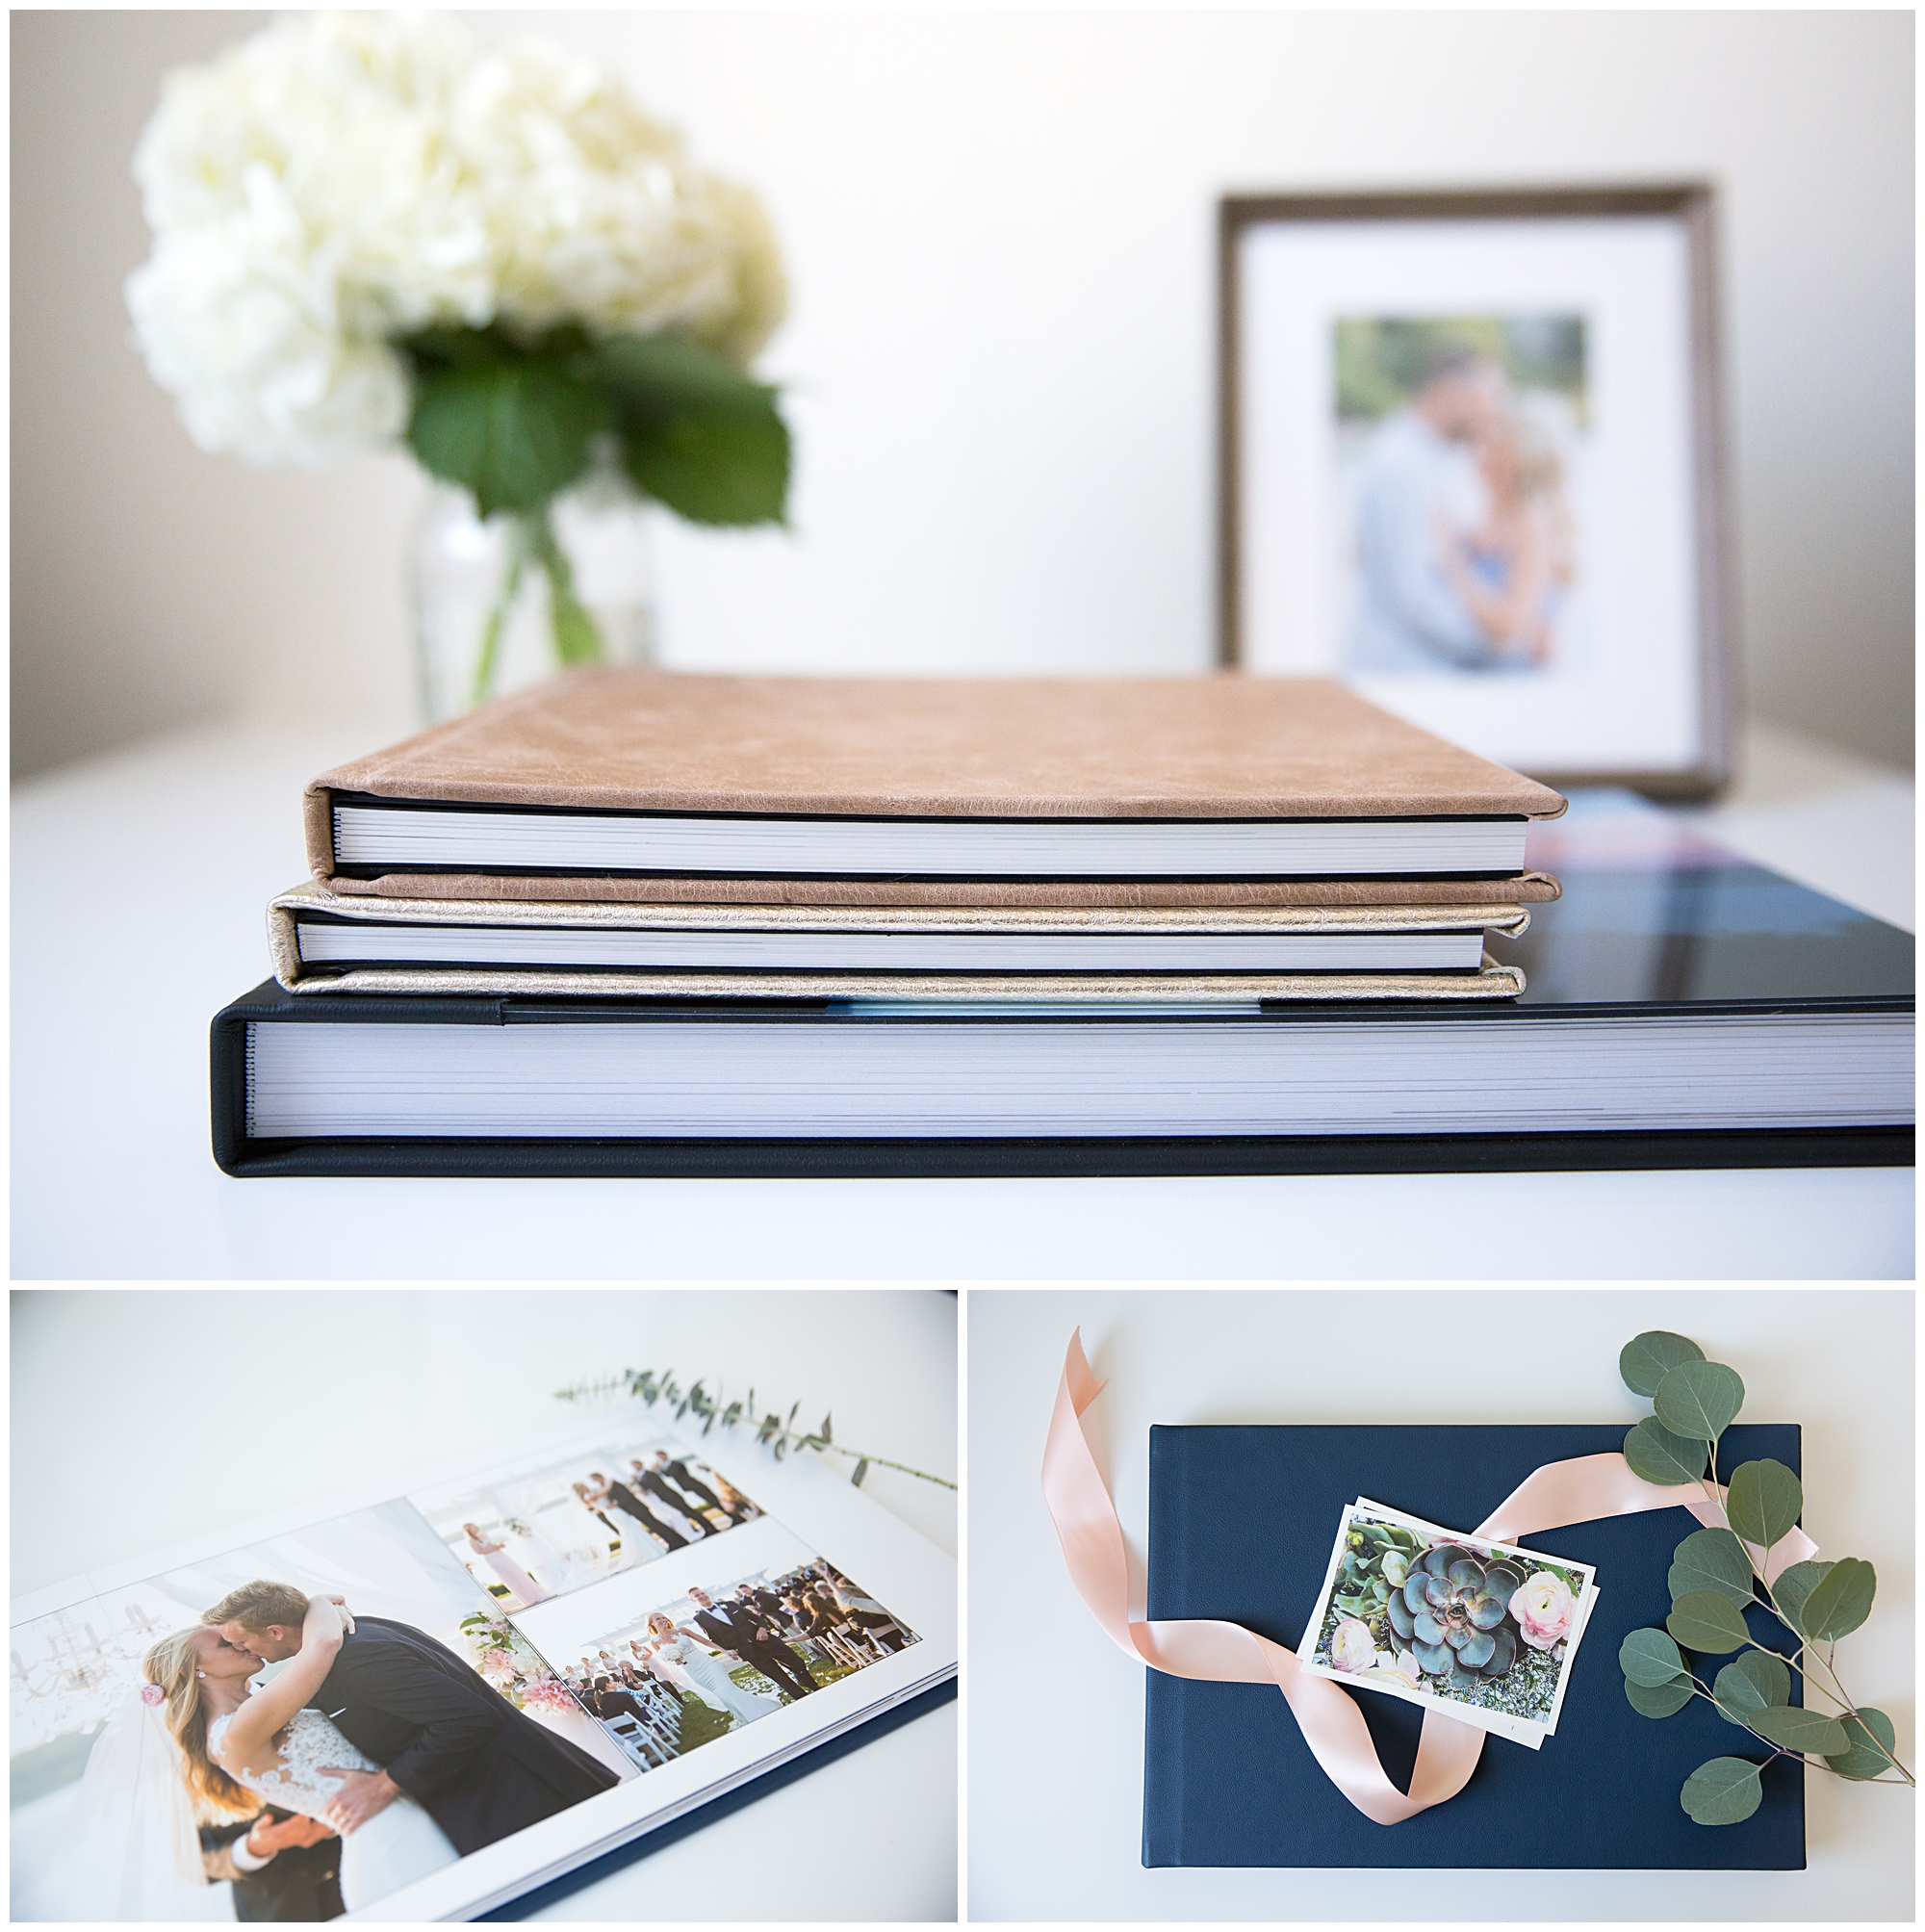 our custom designed album is the ultimate heirloom, crafted with your legacy in mind. Every turn of the page reveals a piece of your story… The spreads are filled with smiles, candids, and the finer details that make up each moment of your wedding day. Your album is your visual story book made to last for generations to come.